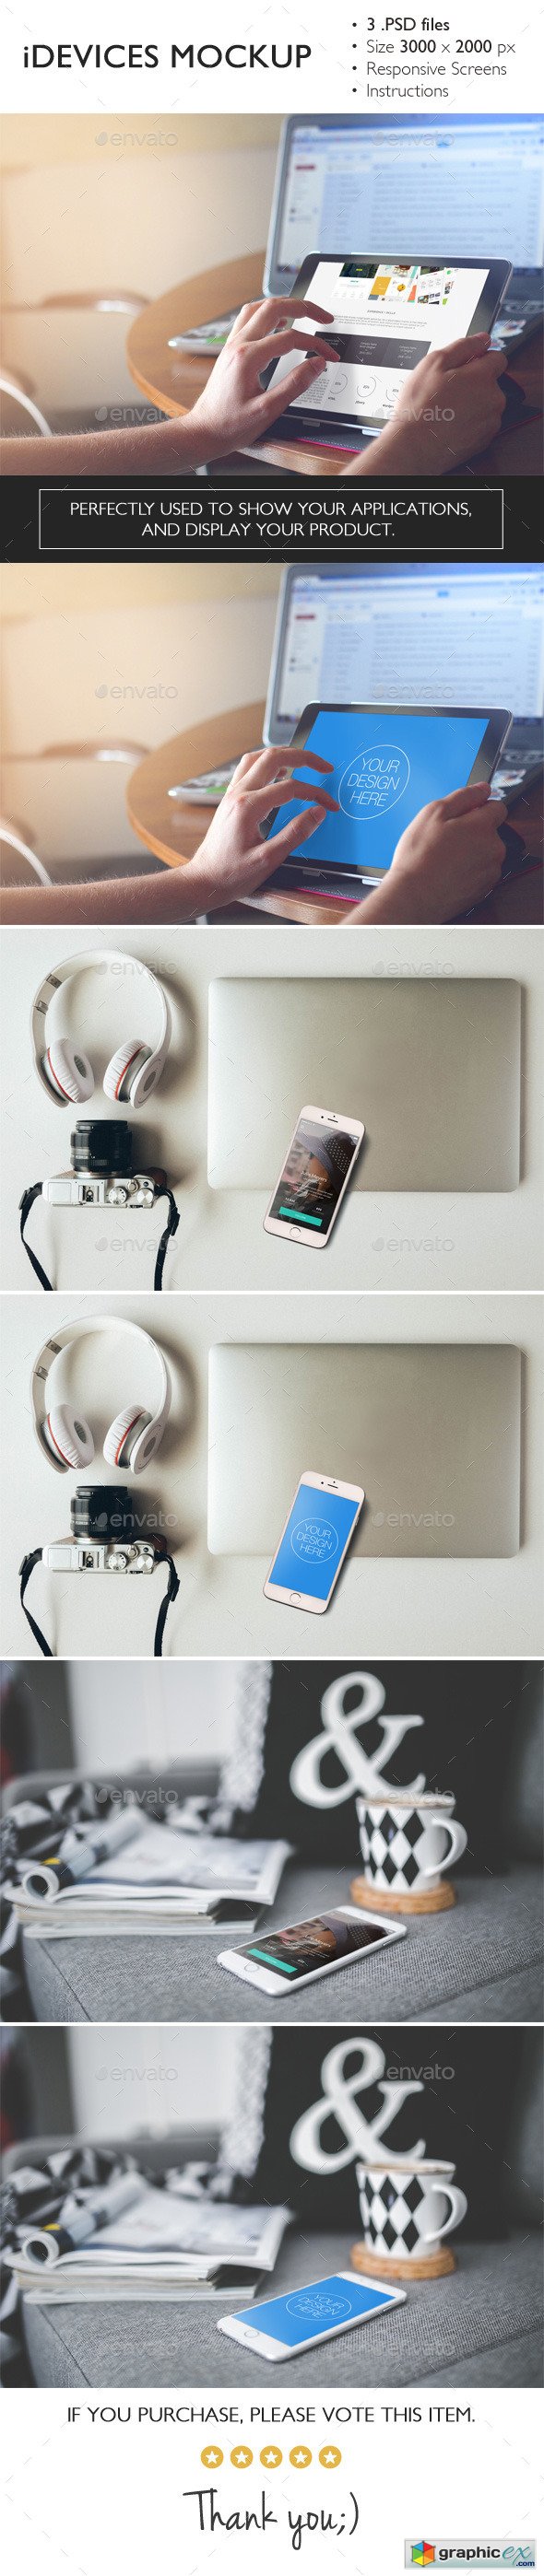 iDevices Mockup 11950762